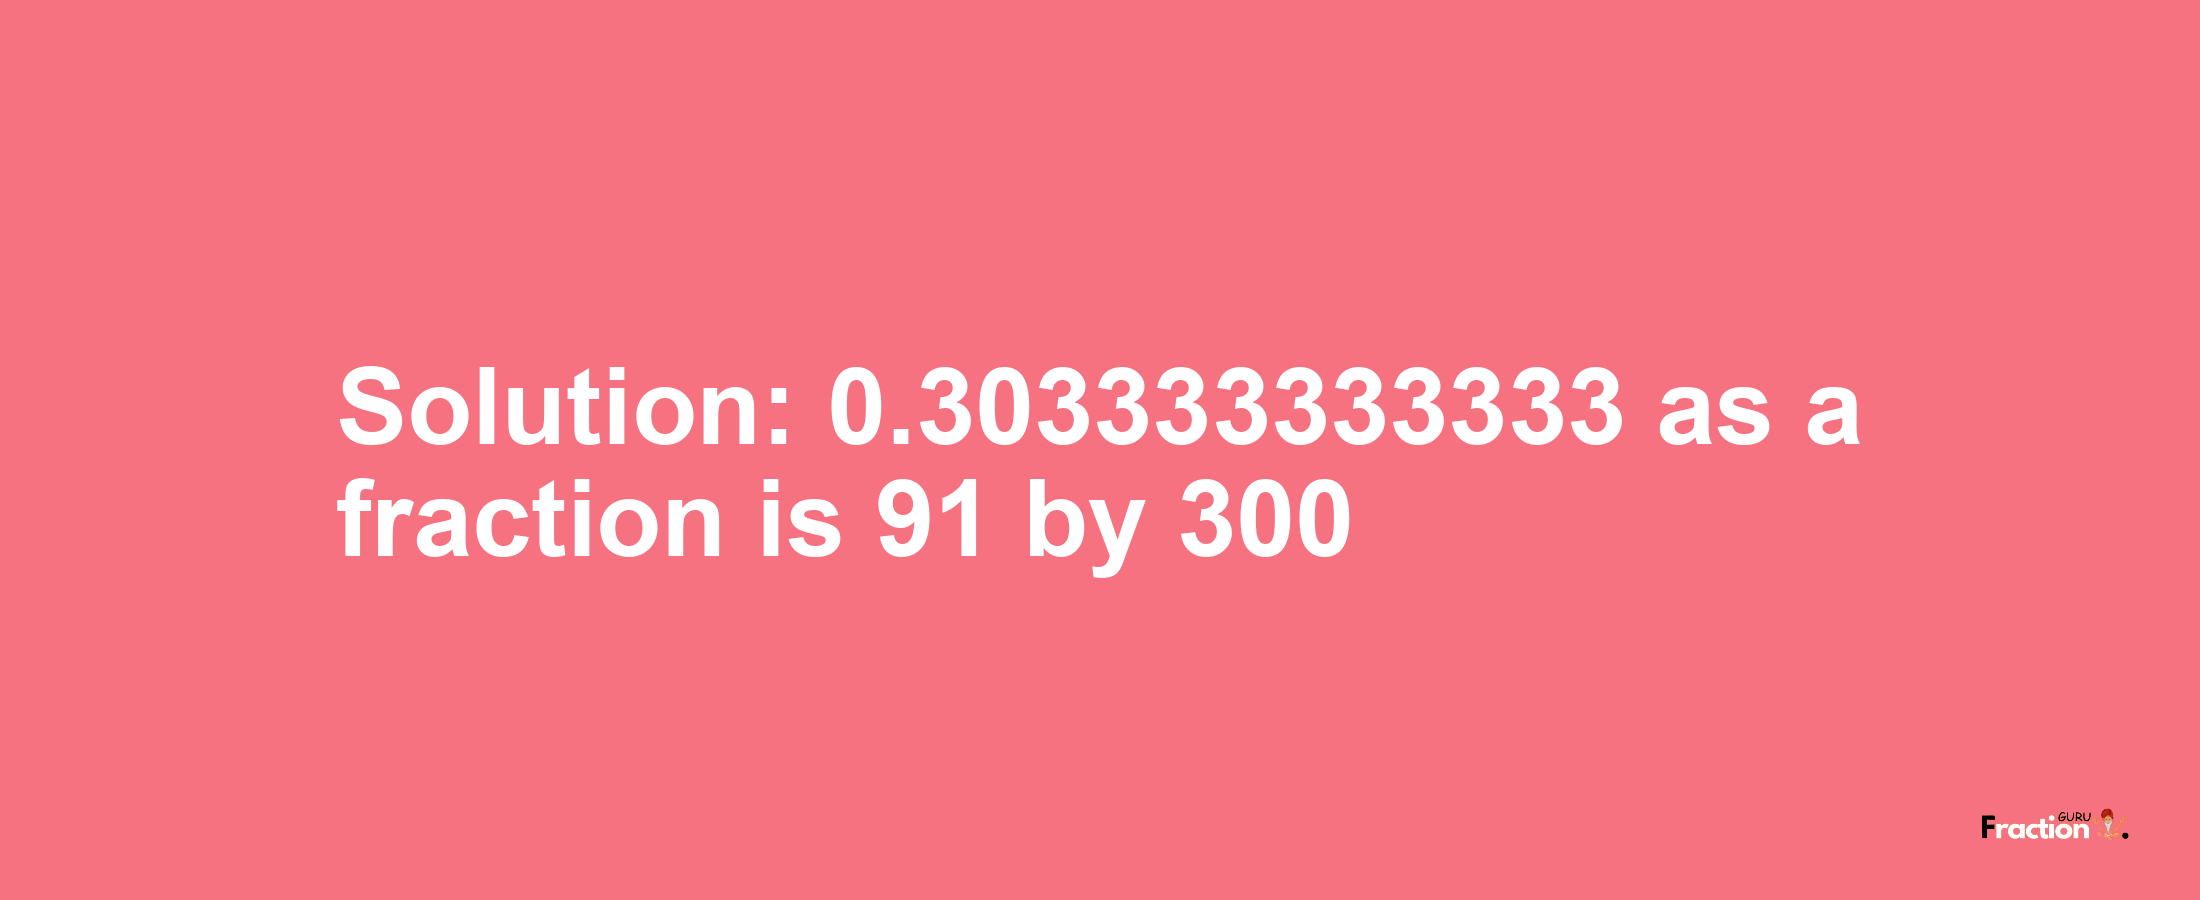 Solution:0.303333333333 as a fraction is 91/300